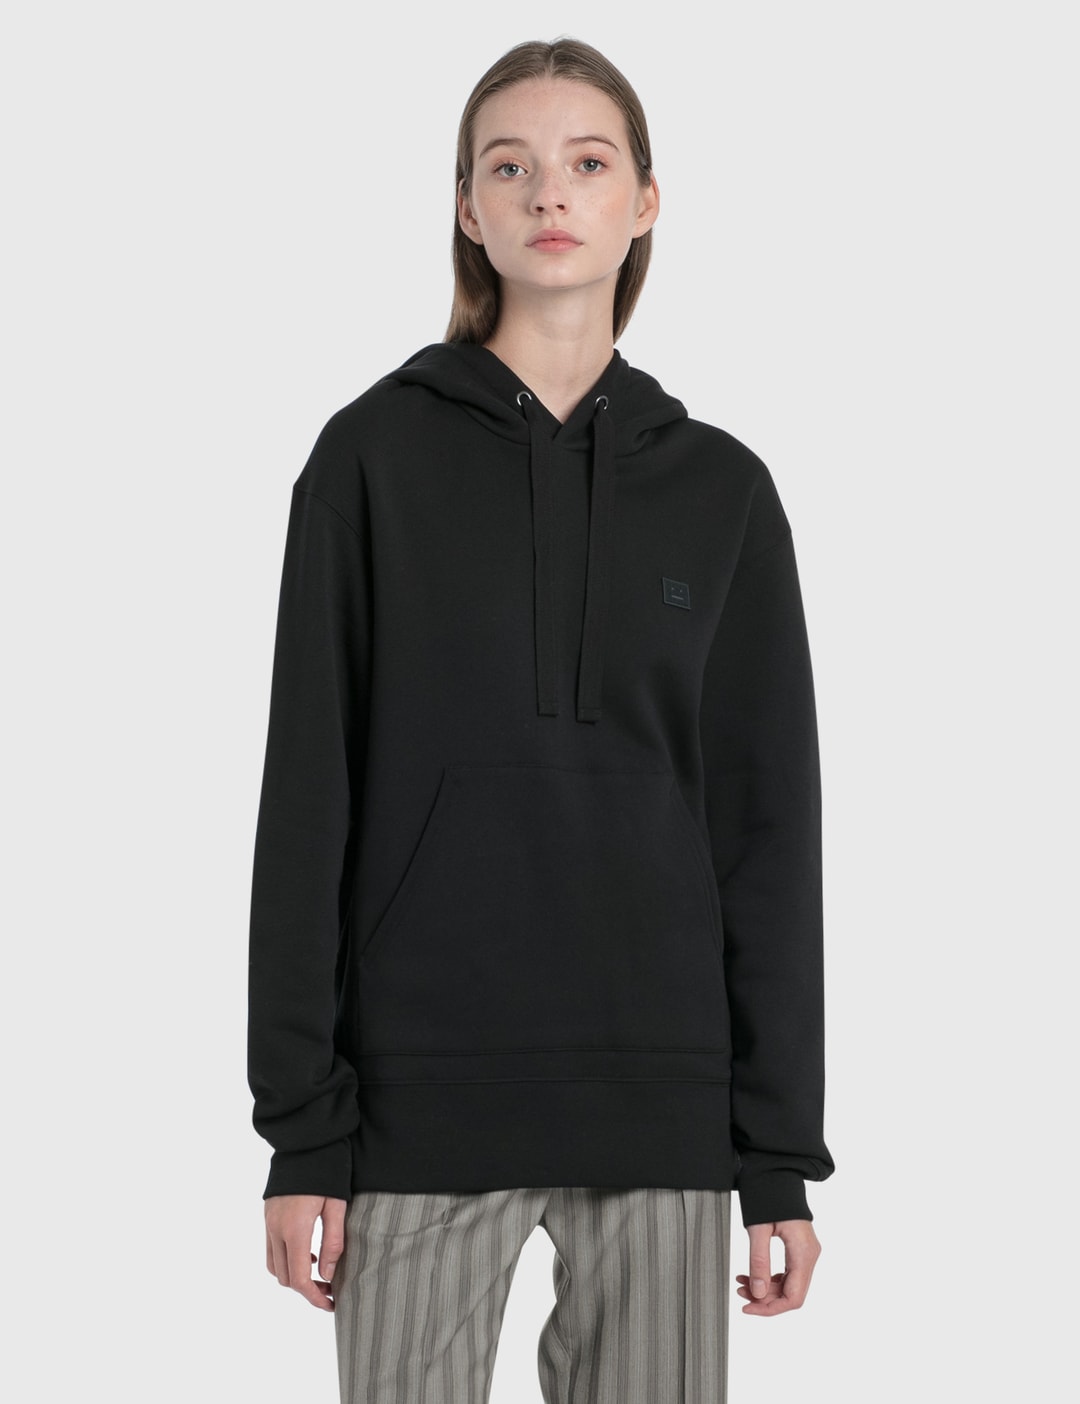 Acne Studios - Ferris Face Hoodie | HBX - Globally Curated Fashion and ...